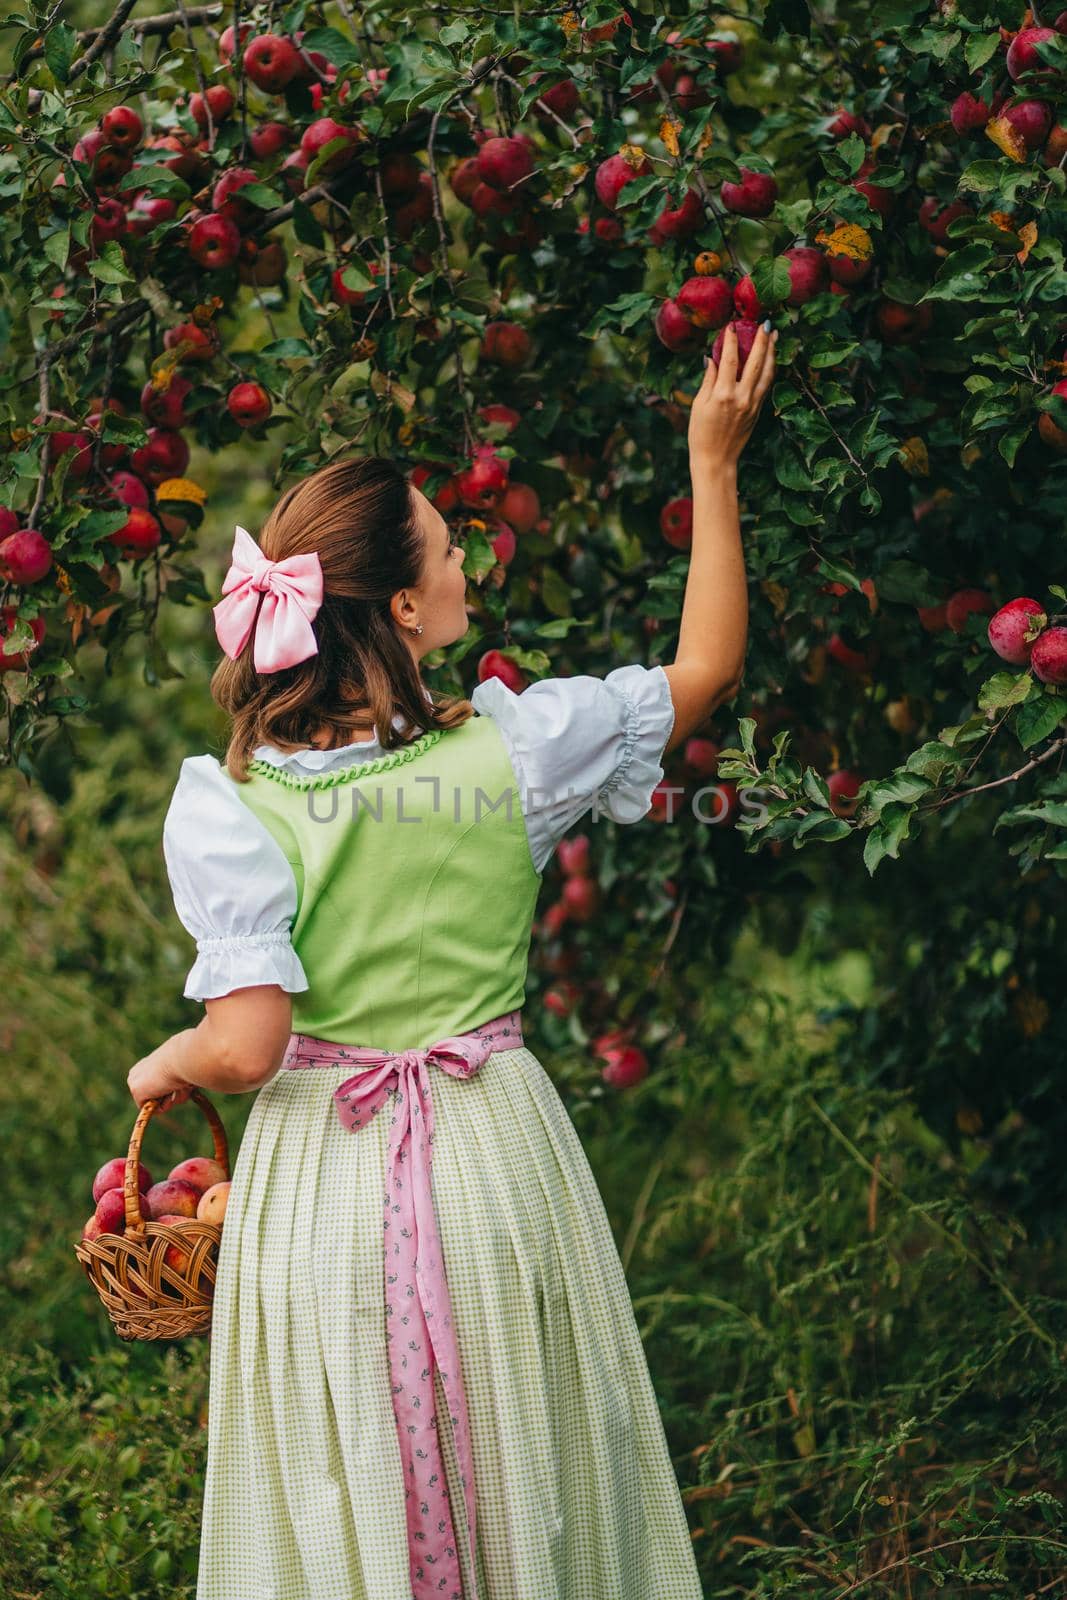 Beautiful woman picking up ripe red apple fruits in green garden. Girl in cute long peasant dress. Organic village lifestyle, agriculture, gardener occupation. High quality photo